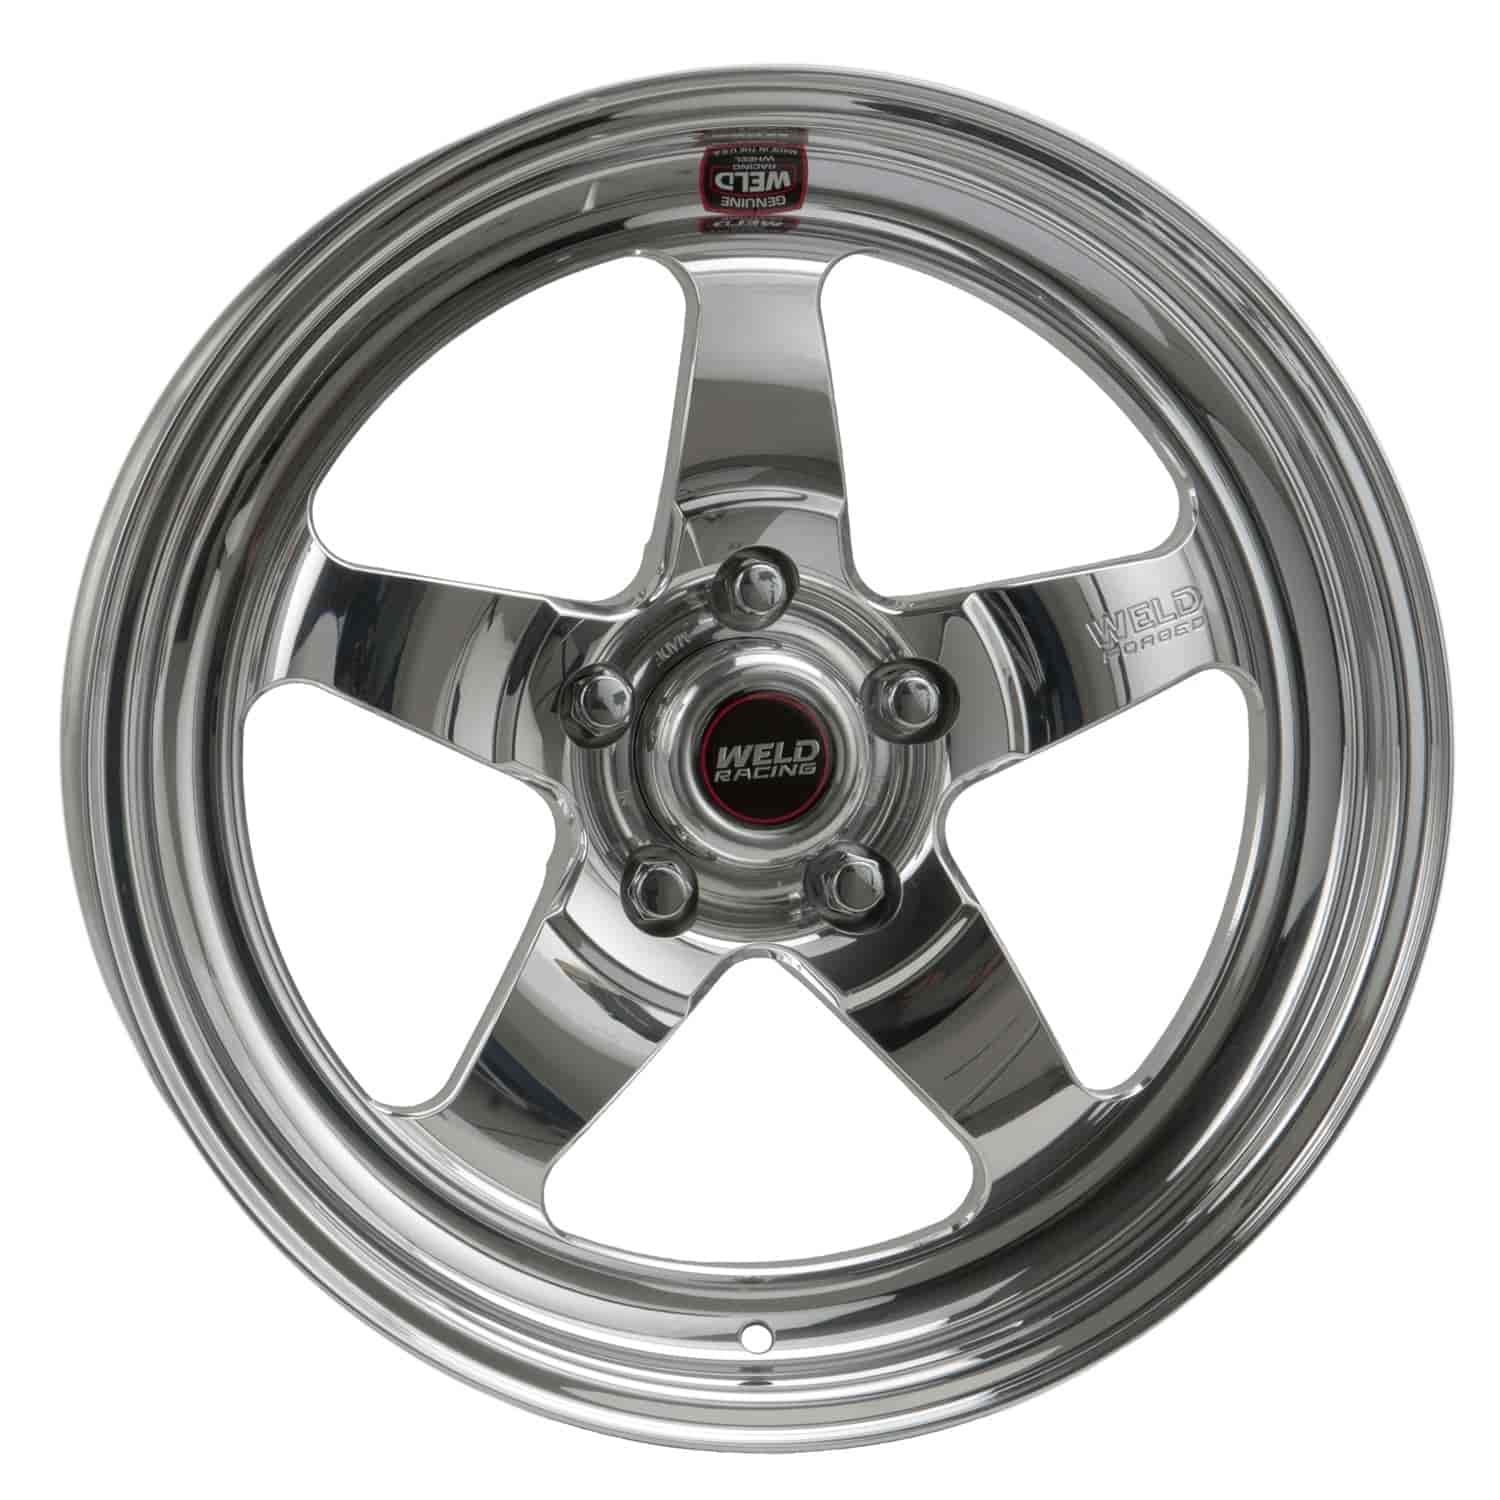 RT-S Series Wheel Size: 15" x 10" Bolt Circle: 5 x 4-3/4" Rear Spacing: 4-1/2" Offset: -28.89mm